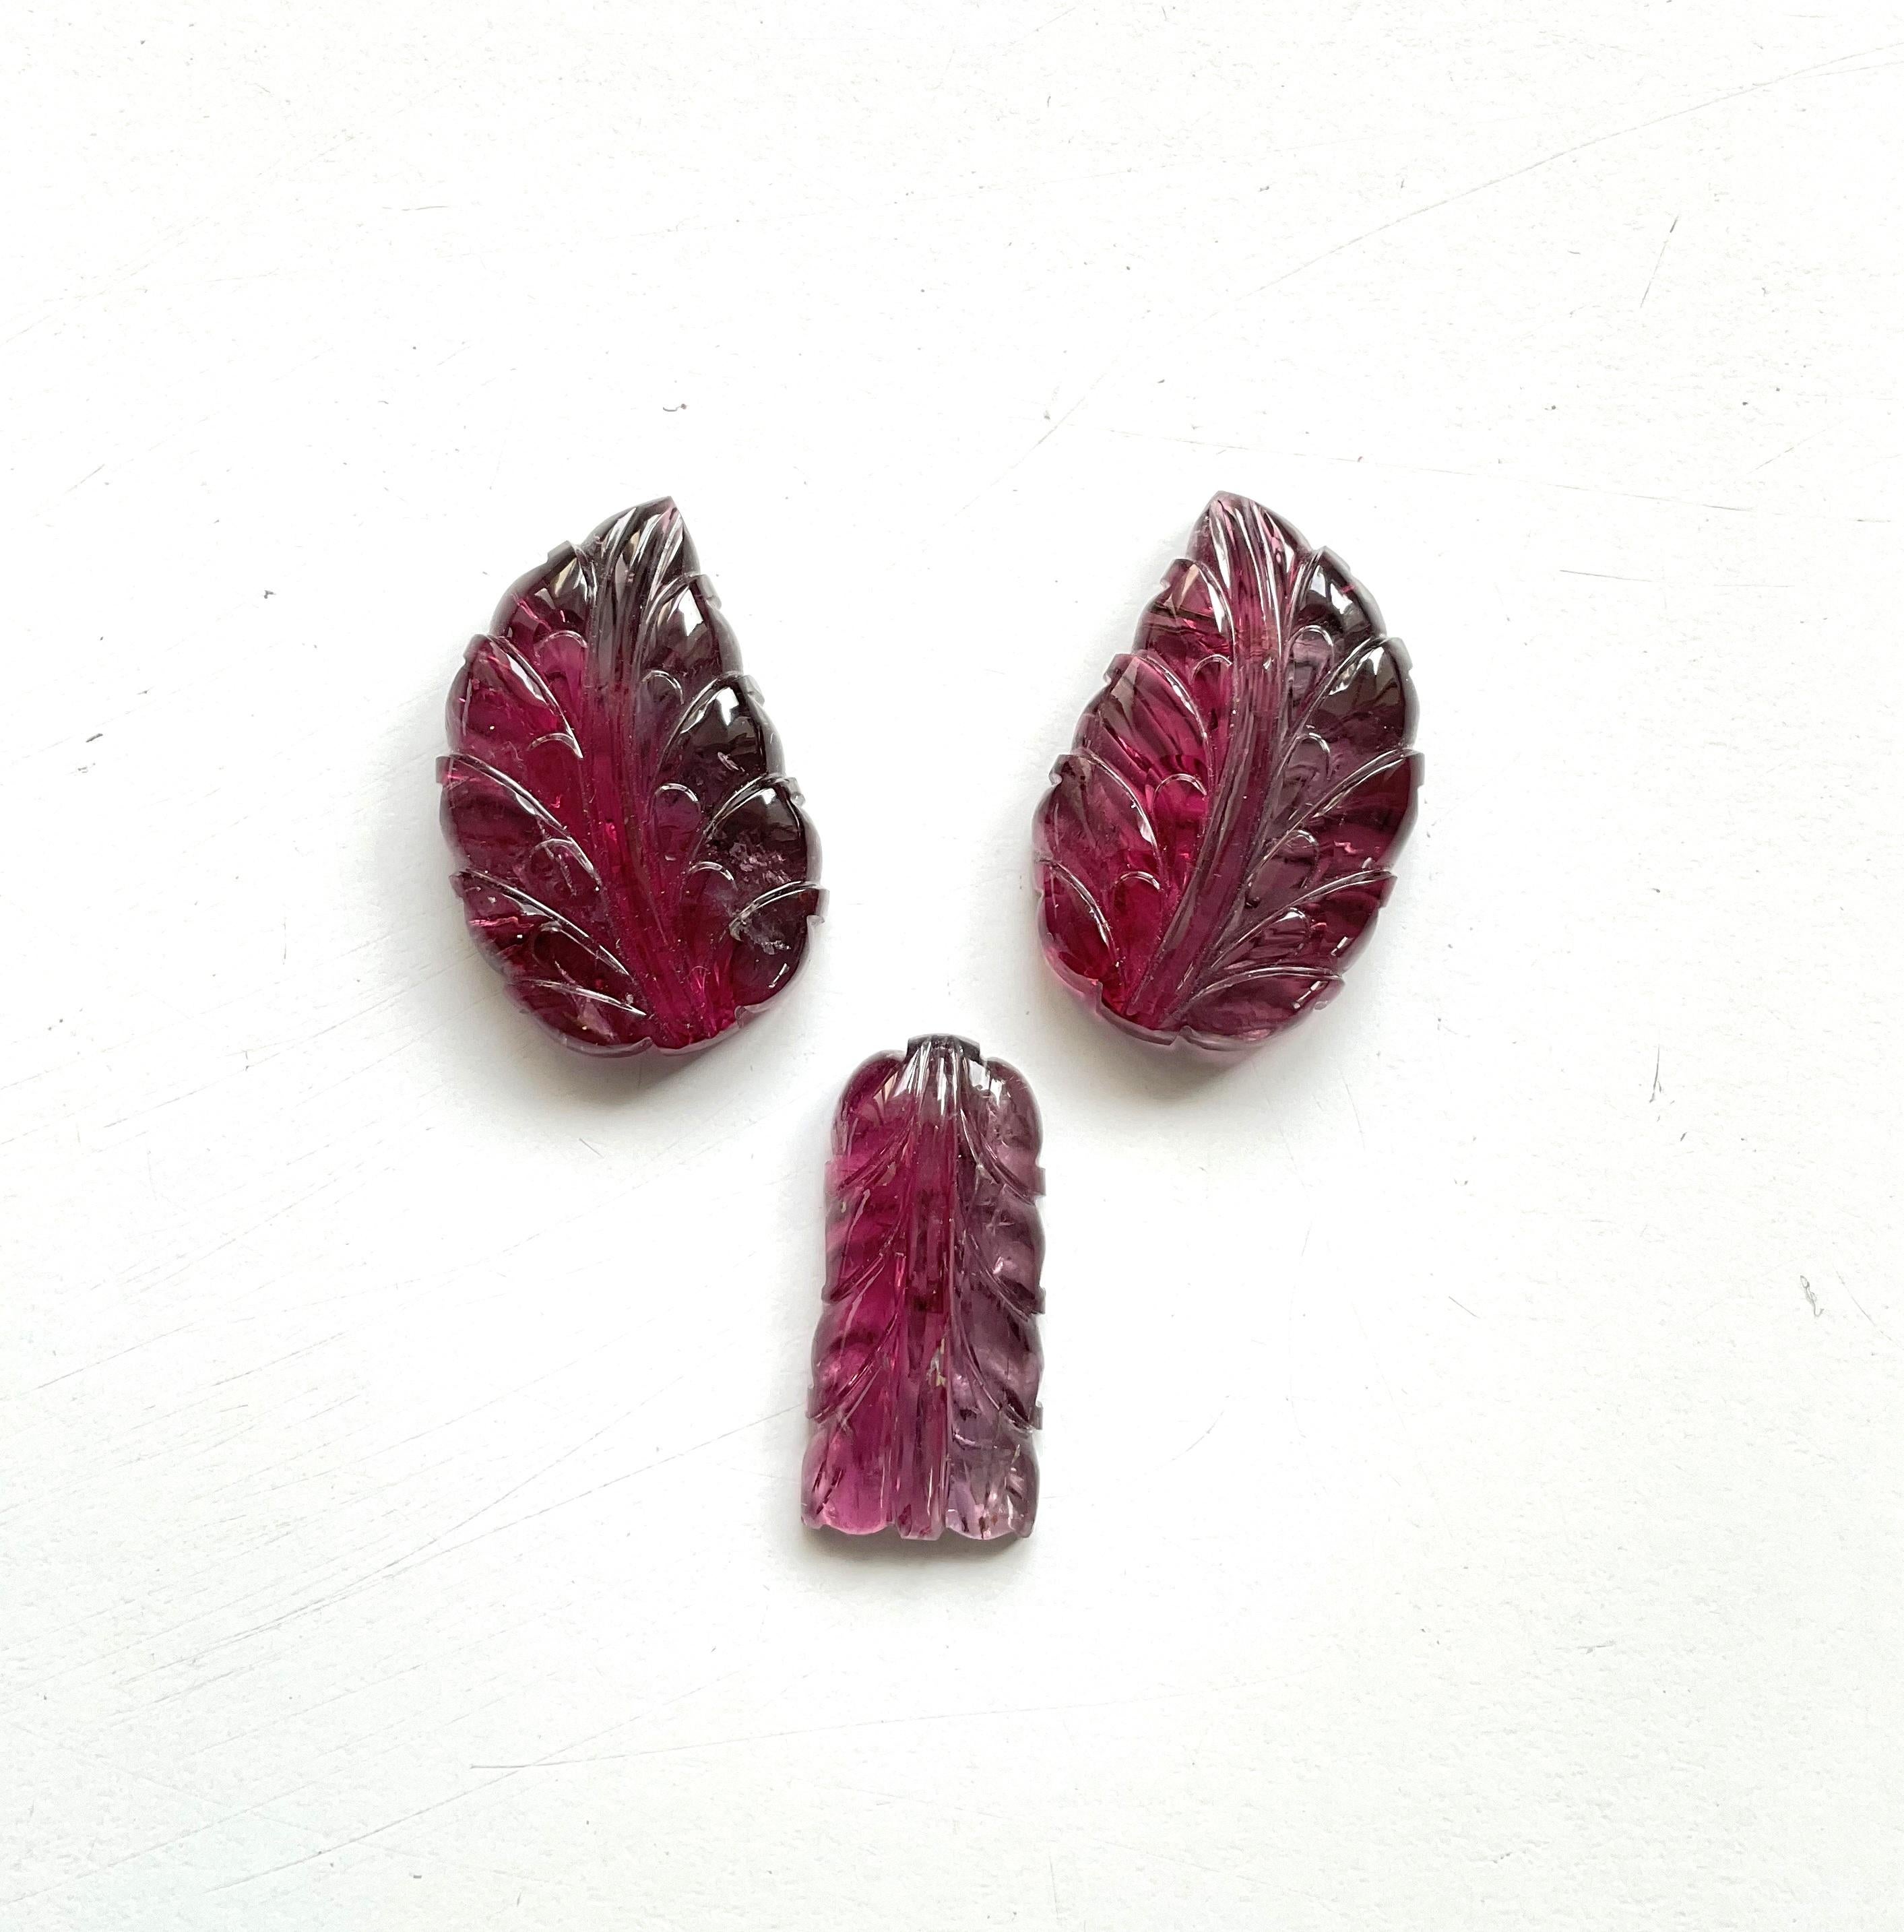 84.37 Carats Rubellite Tourmaline Carved Leaf 3 Pieces Fine jewelry Natural Gem

Weight: 84.37 Carats
Size: 26x12 To 30x19 MM
Pieces: 3
Shape: Carved Leaf 

